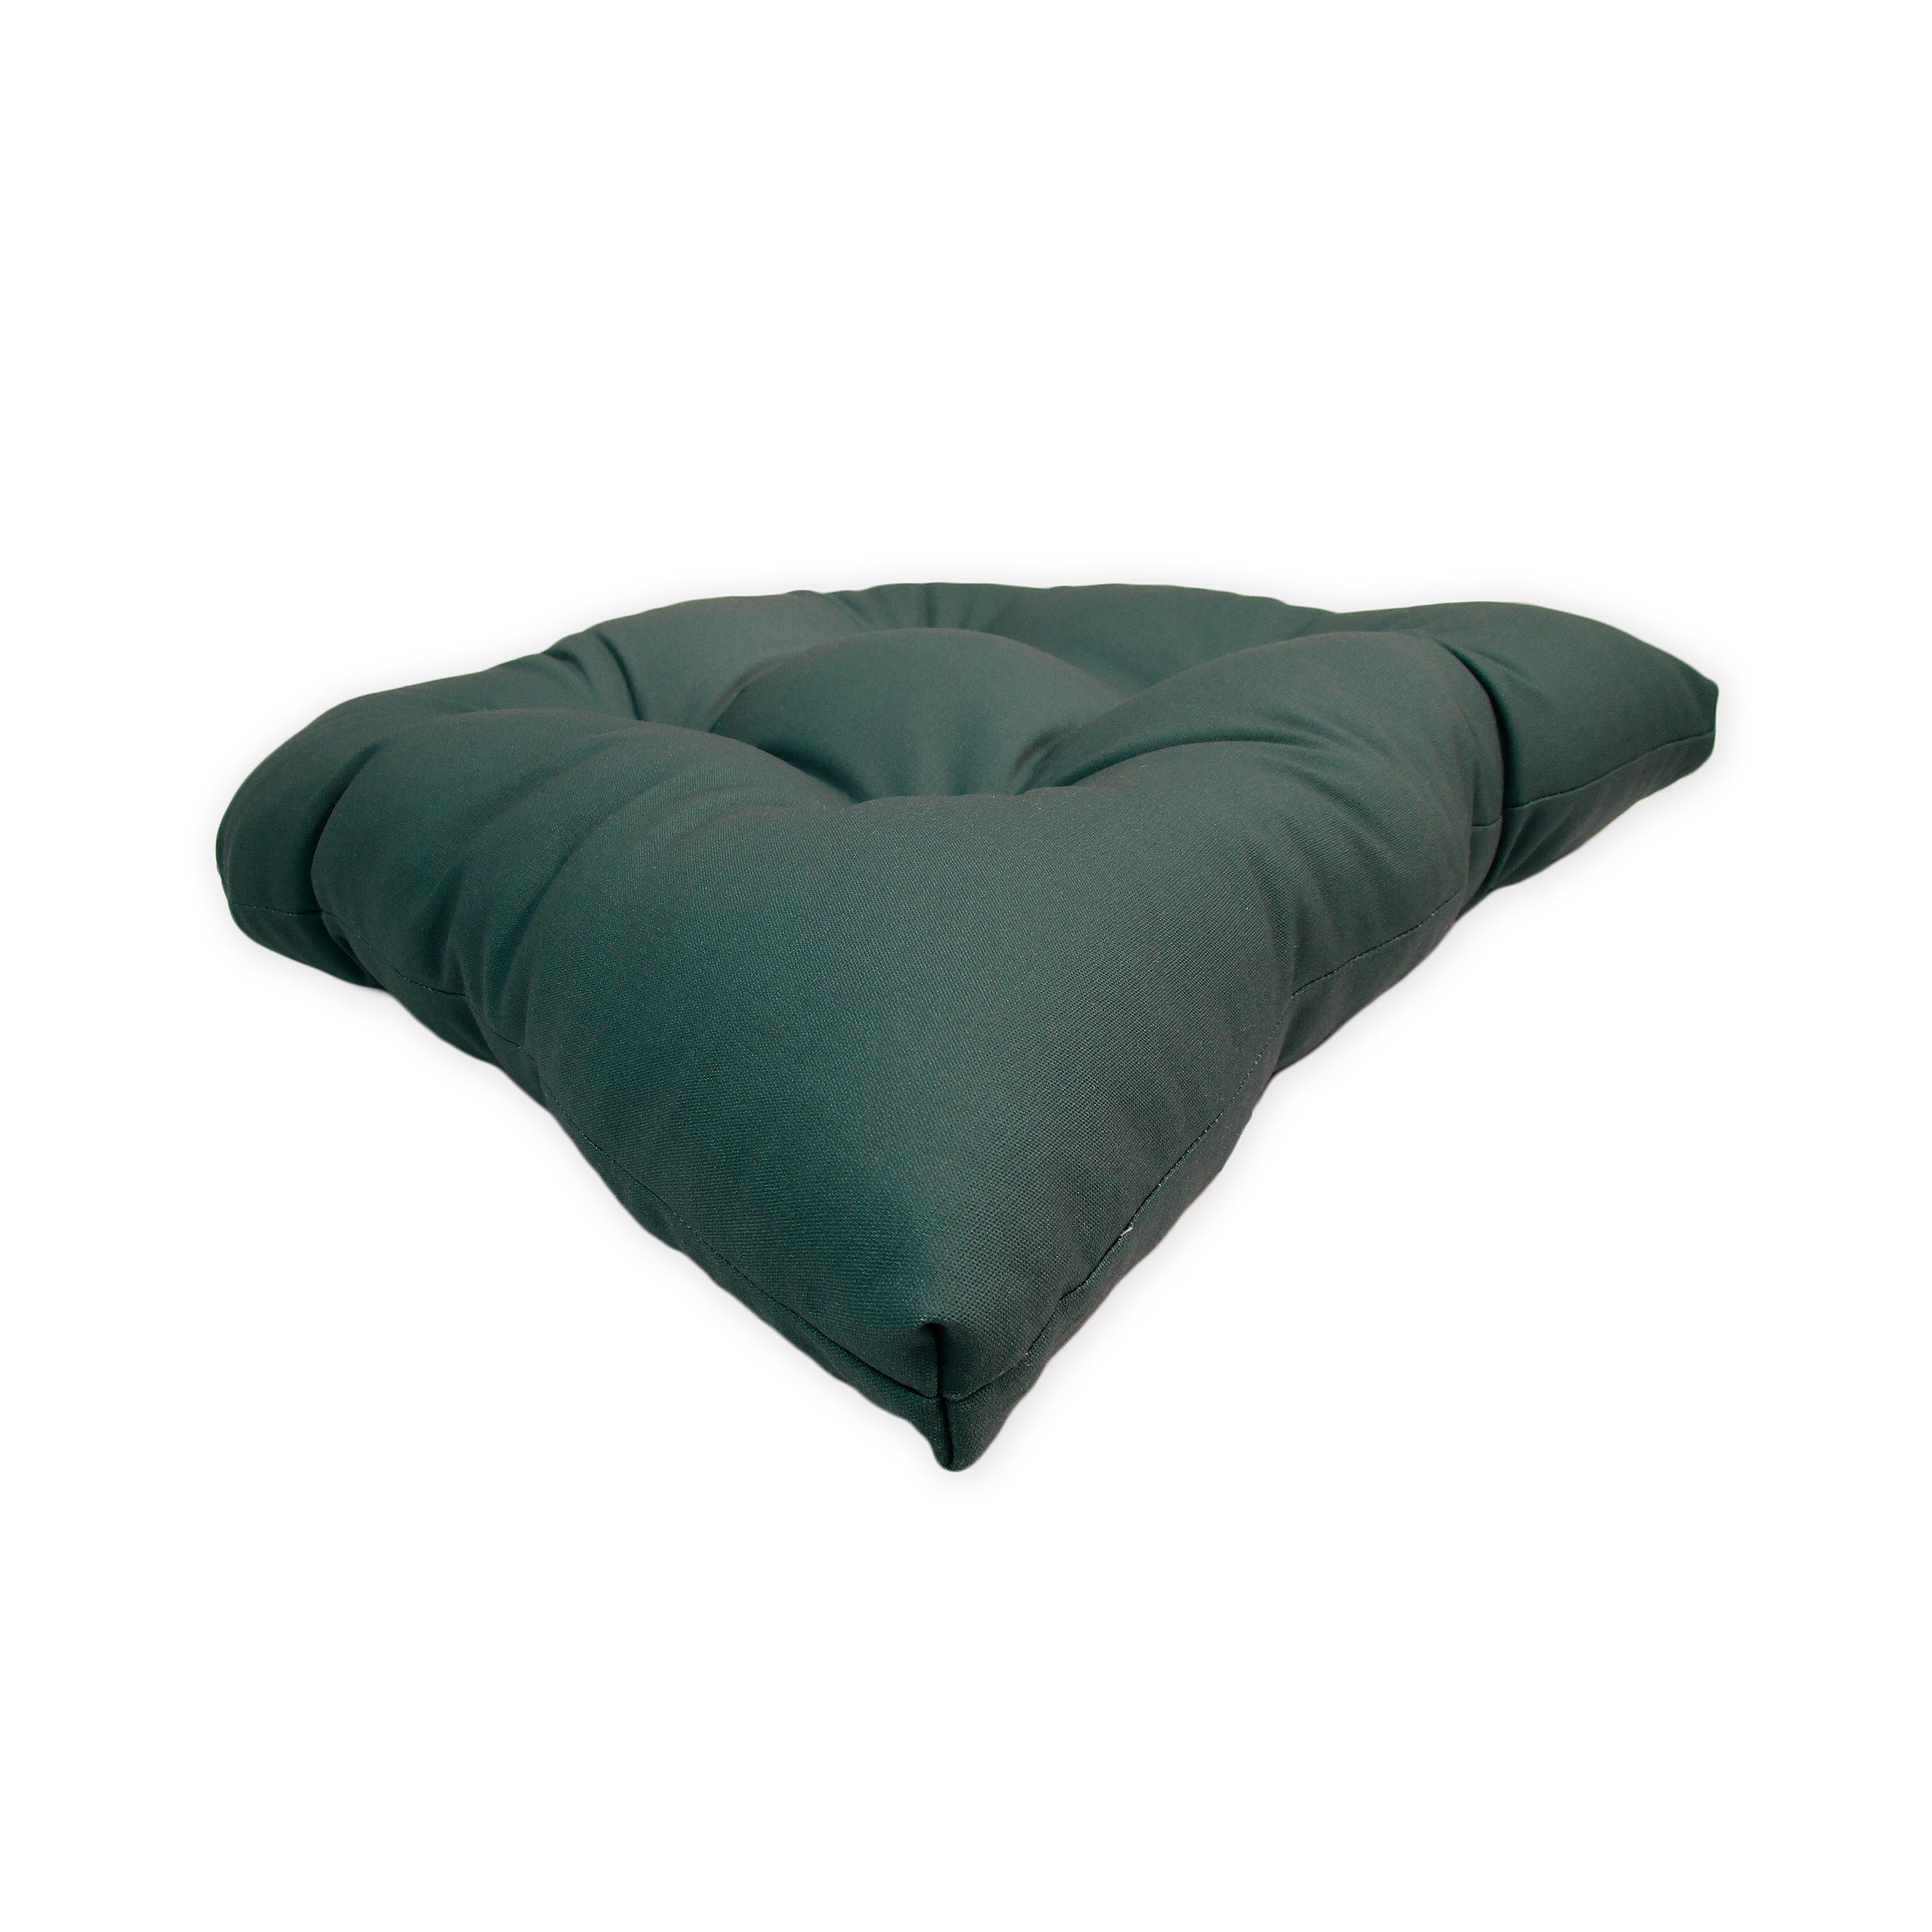 Pressure Reducing Chair Cushion Hunter Green for sale online